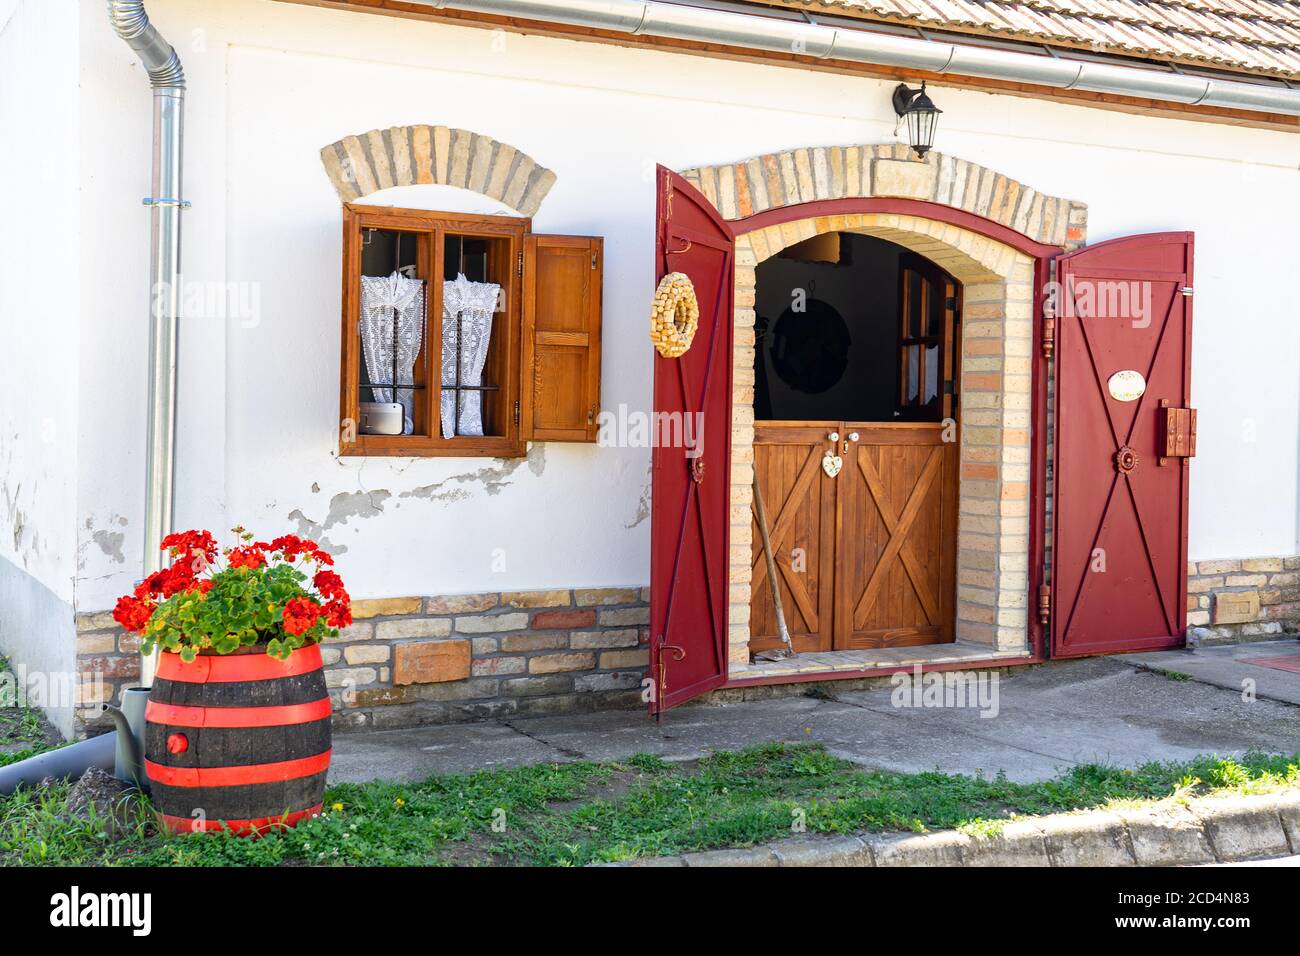 beautiful little cellar village in Hajos Hungary famous for festival events Stock Photo